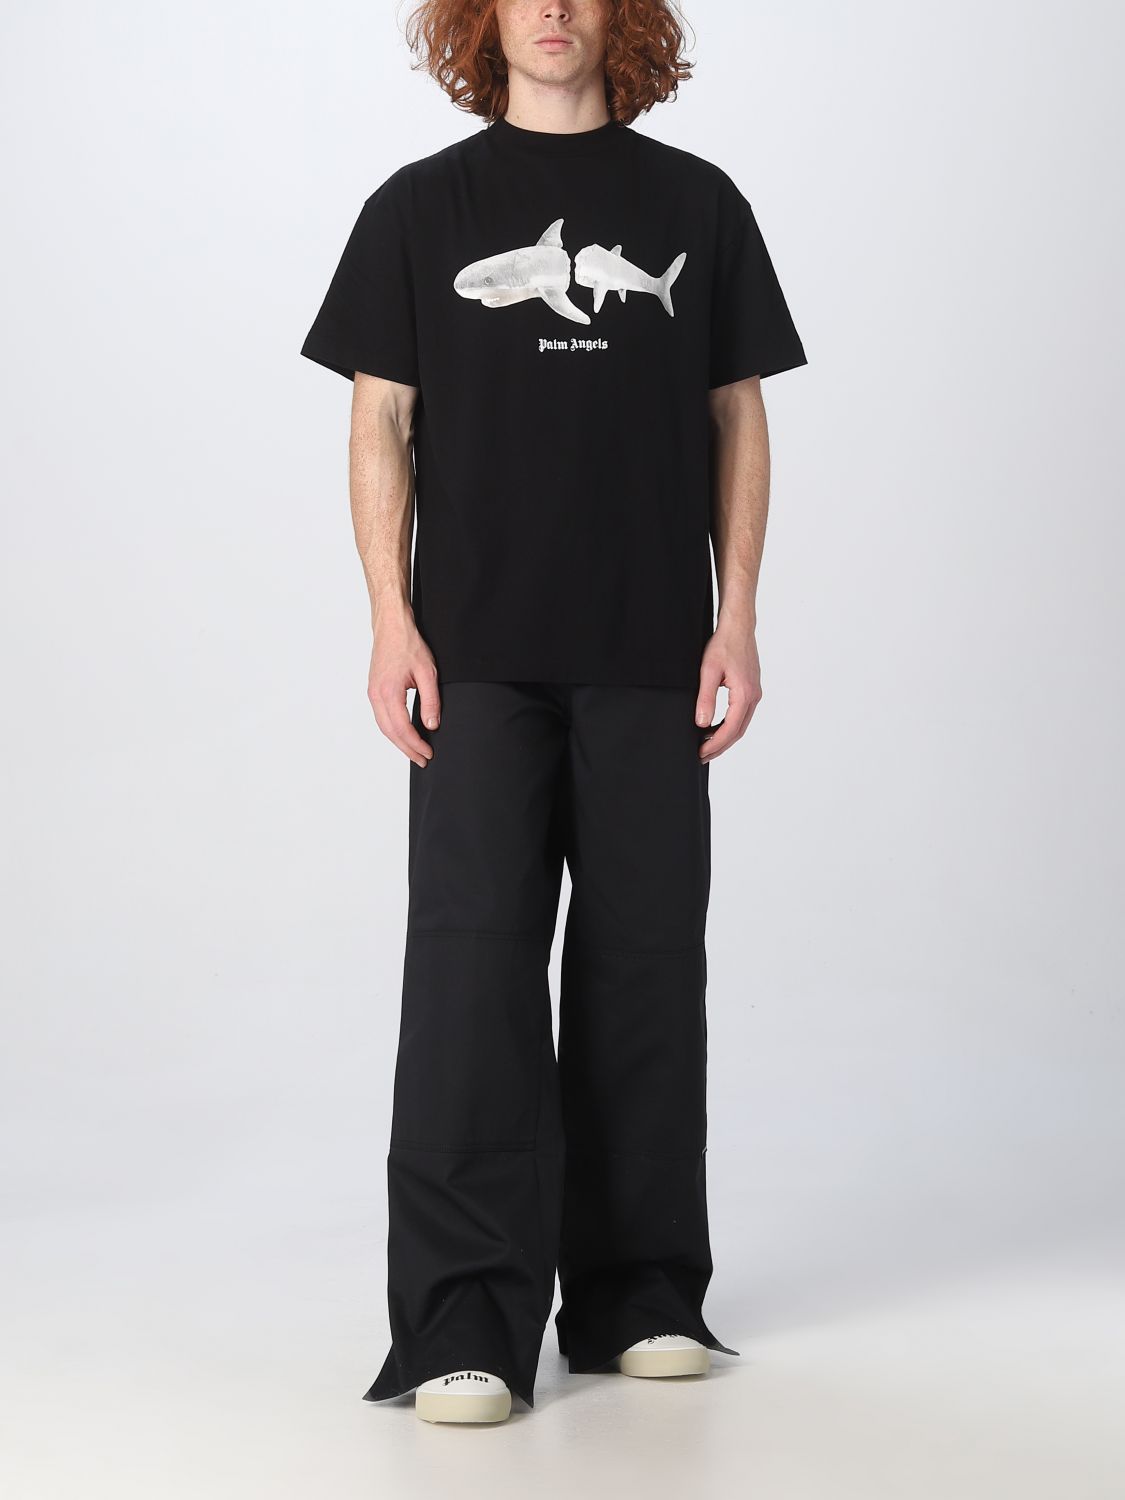 T-shirt Palm Angels: T-Shirt Shark Palm Angels in cotone nero 2